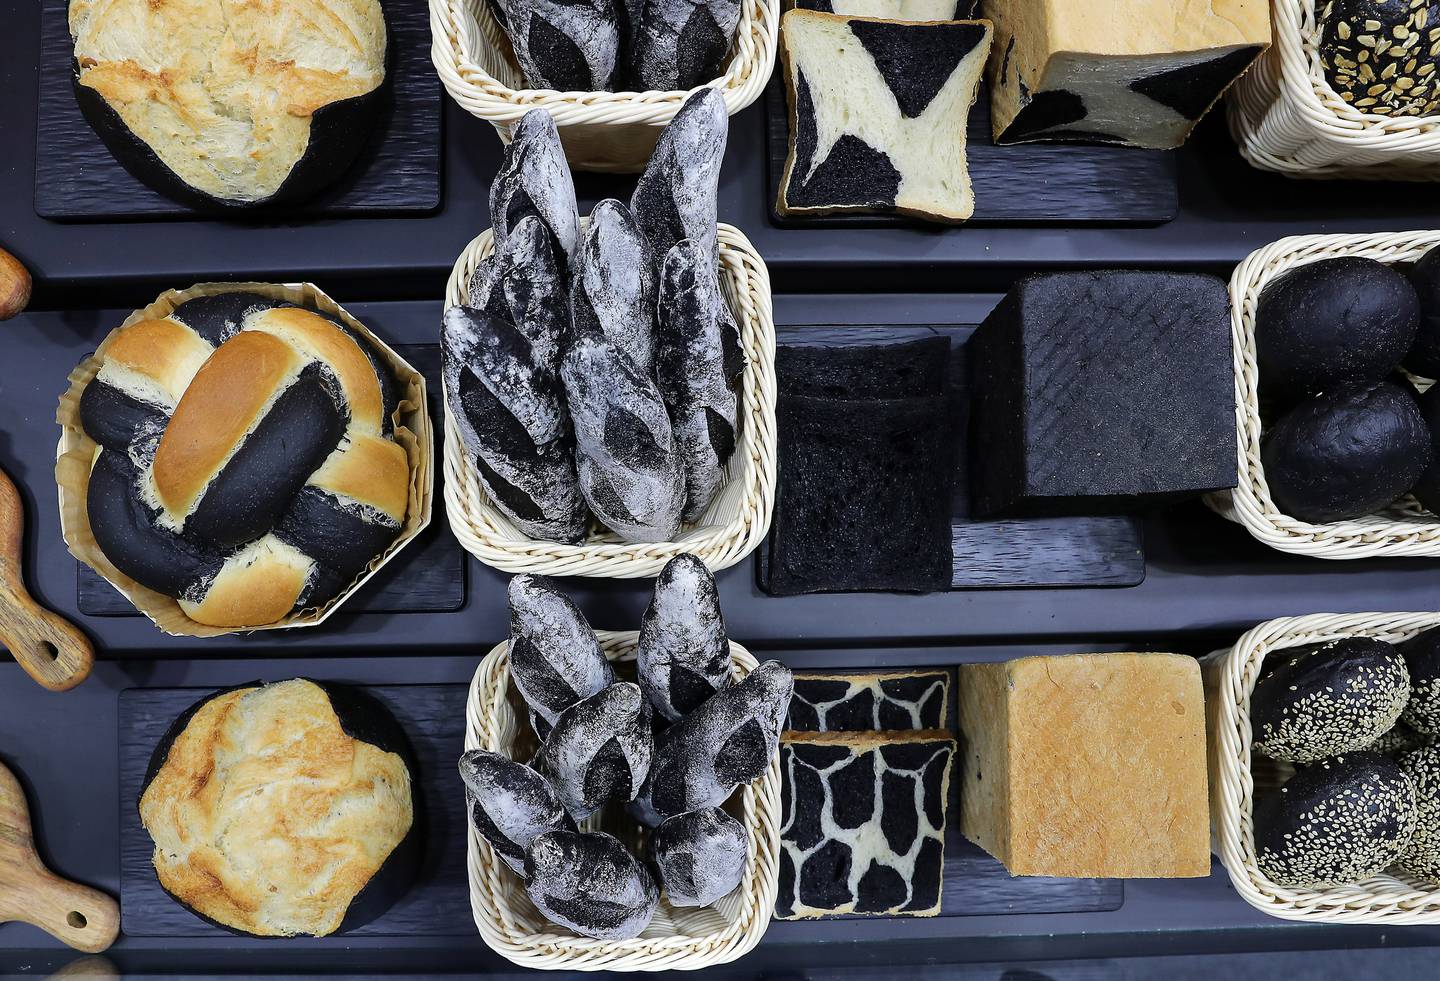 Charcoal infused bread on display at the Abel & Schafer stand at Gulfood.  Pawan Singh / The National